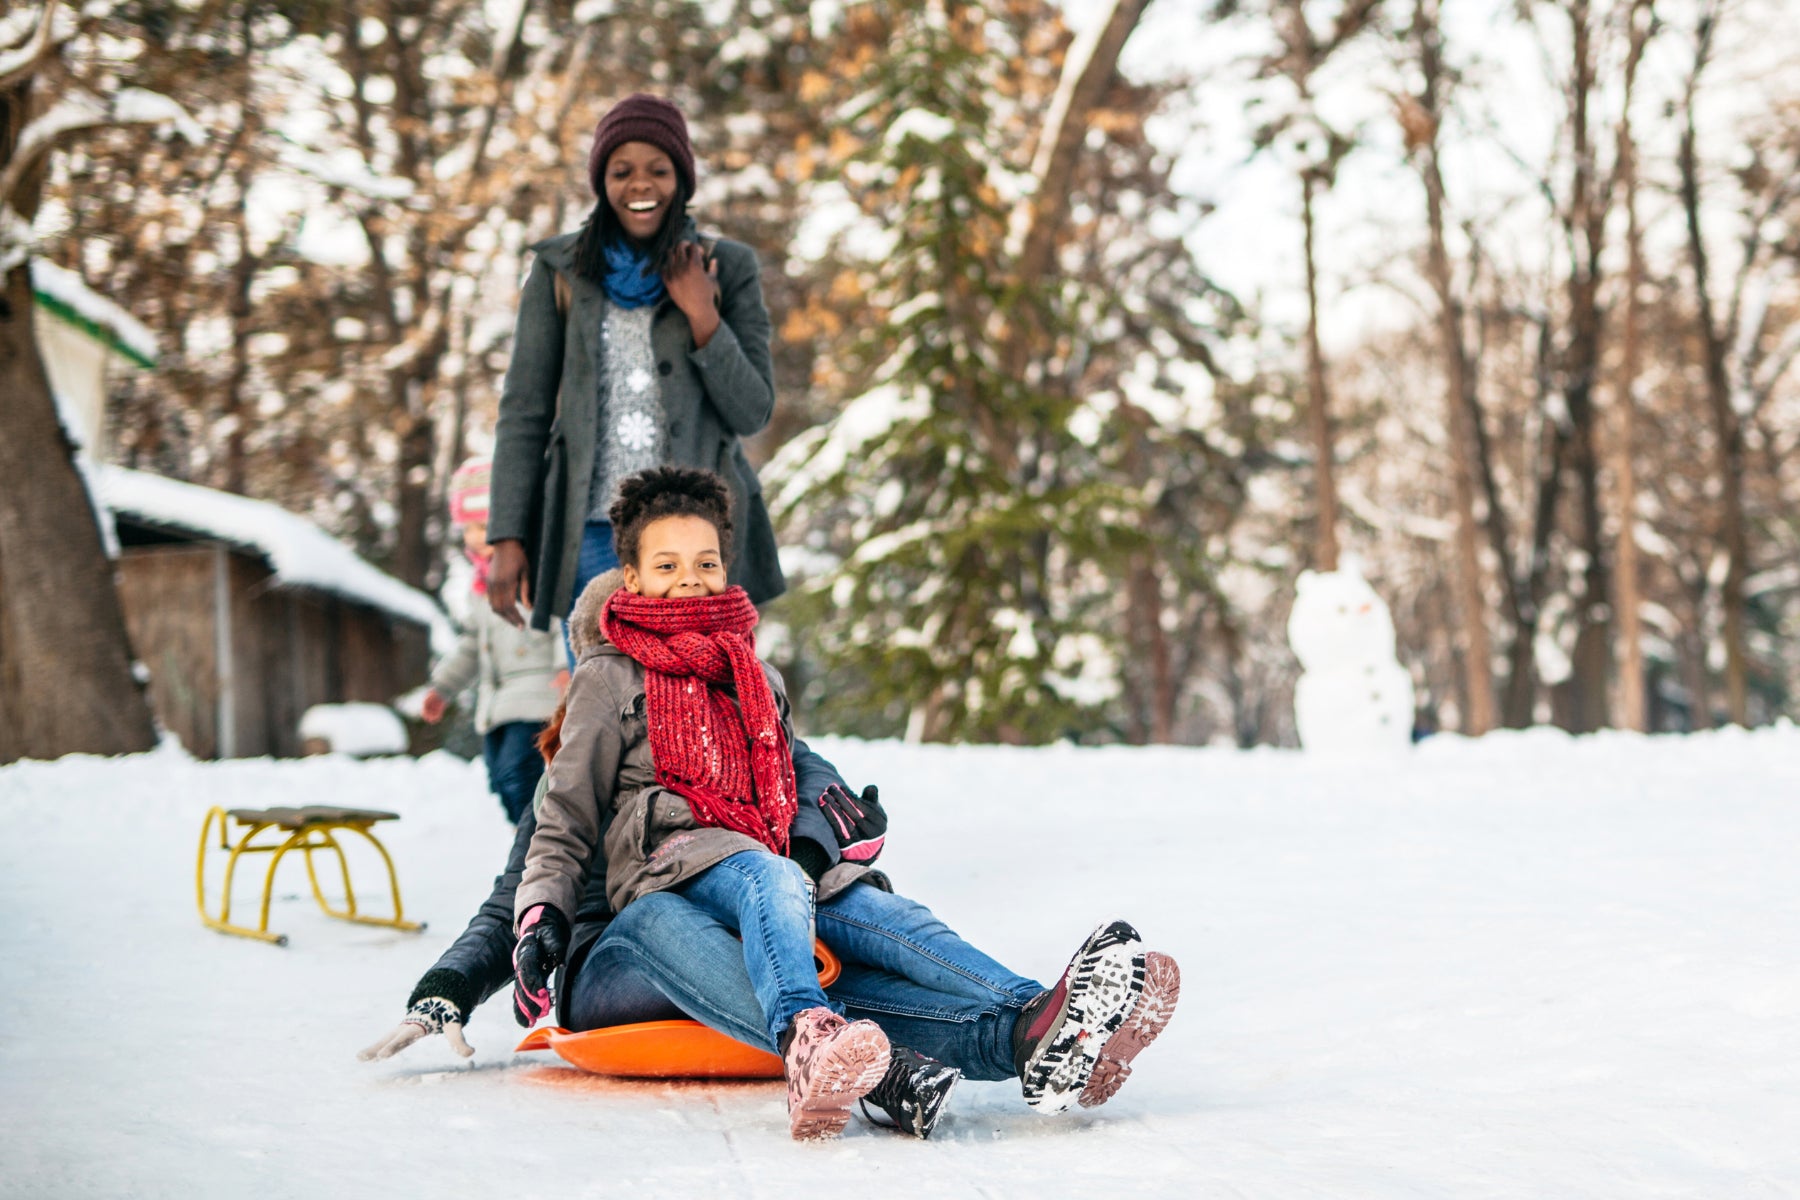 woman and child sled winter fun snow nature forest